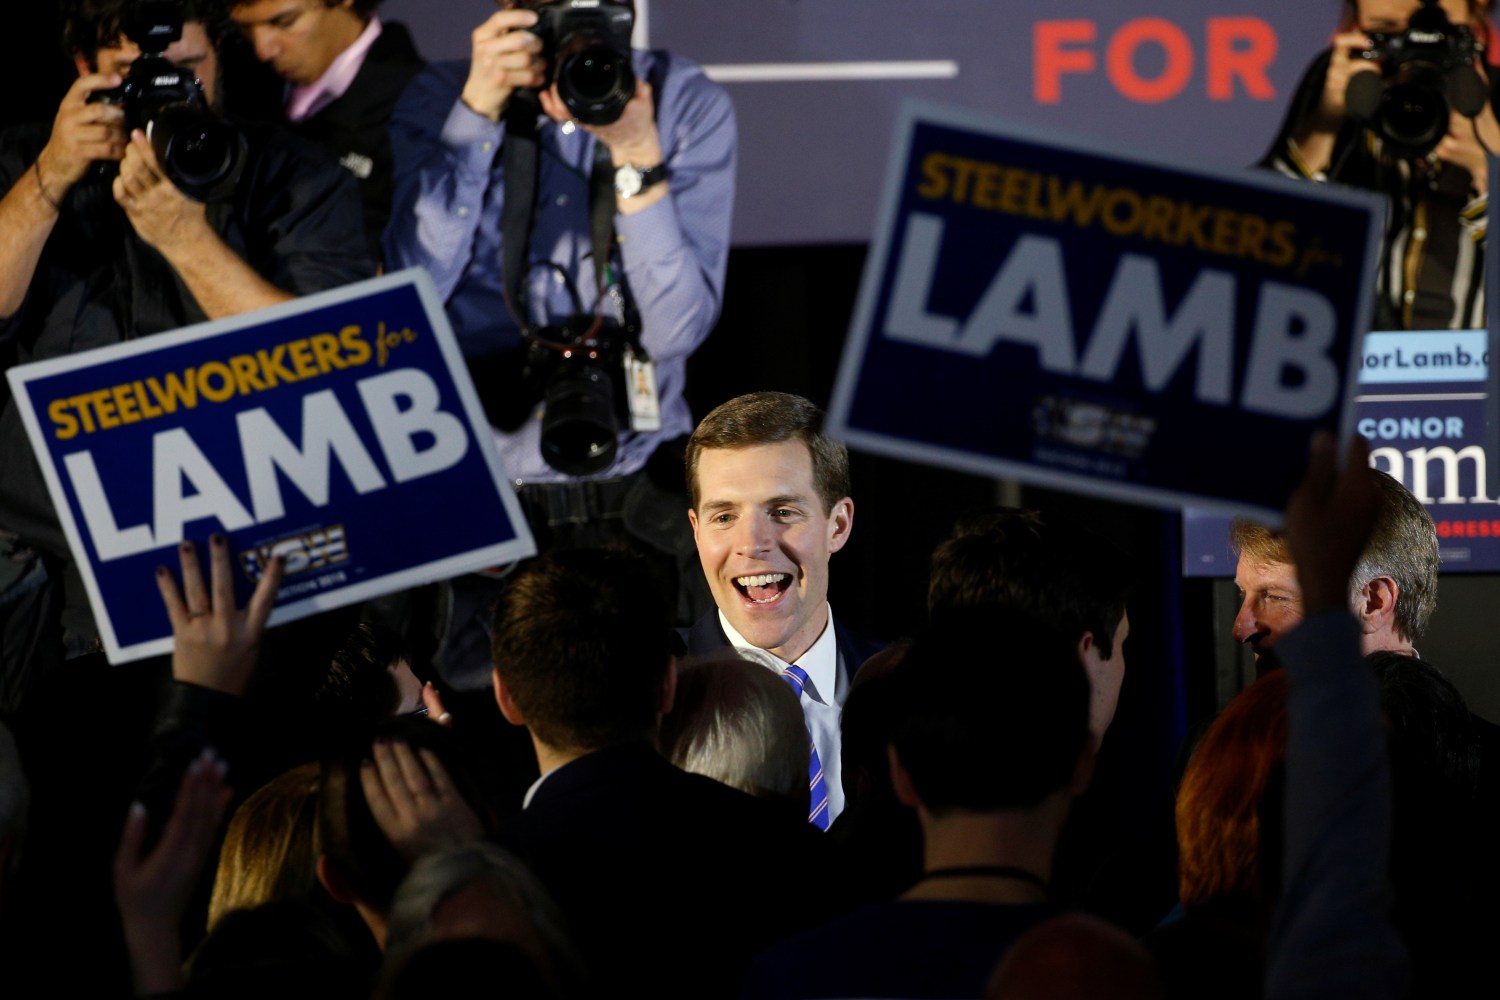 U.S. Democratic congressional candidate Conor Lamb is greeted by supporters during his election night rally in Pennsylvania's 18th U.S. Congressional district special election against Republican candidate and State Rep. Rick Saccone, in Canonsburg, Pennsylvania, March 13, 2018. REUTERS/Brendan McDermid - RC190011A7B0